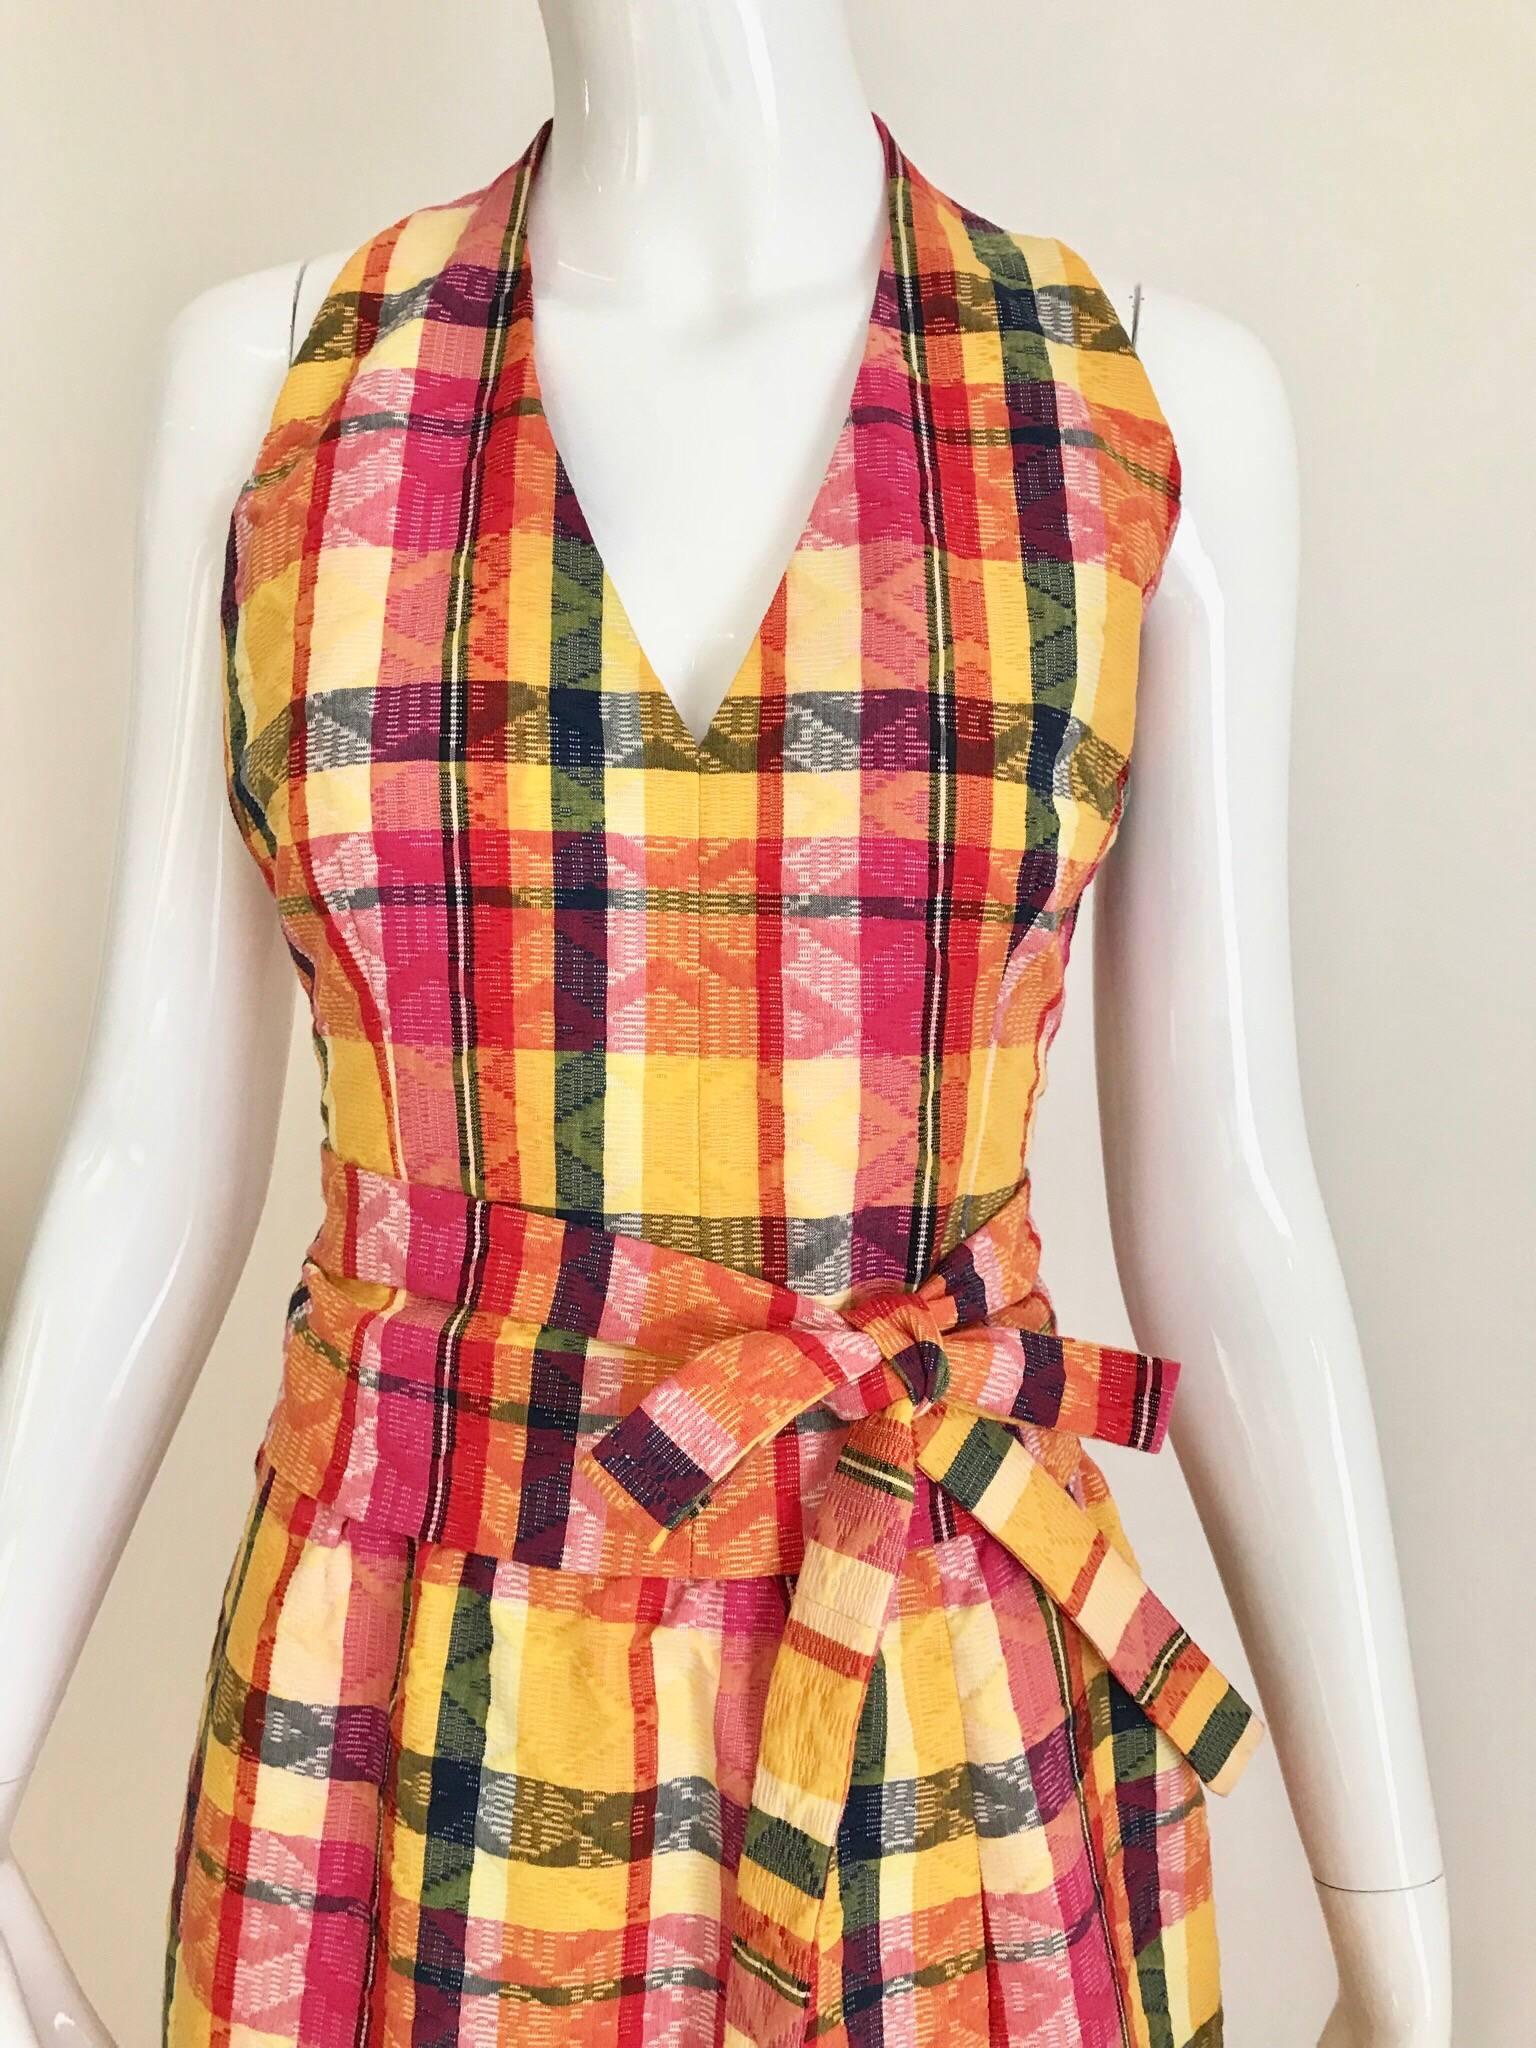 Vintage Givenchy Yellow, orange plaid cotton summer/vacation halter top and maxi skirt set.
Fit size 4